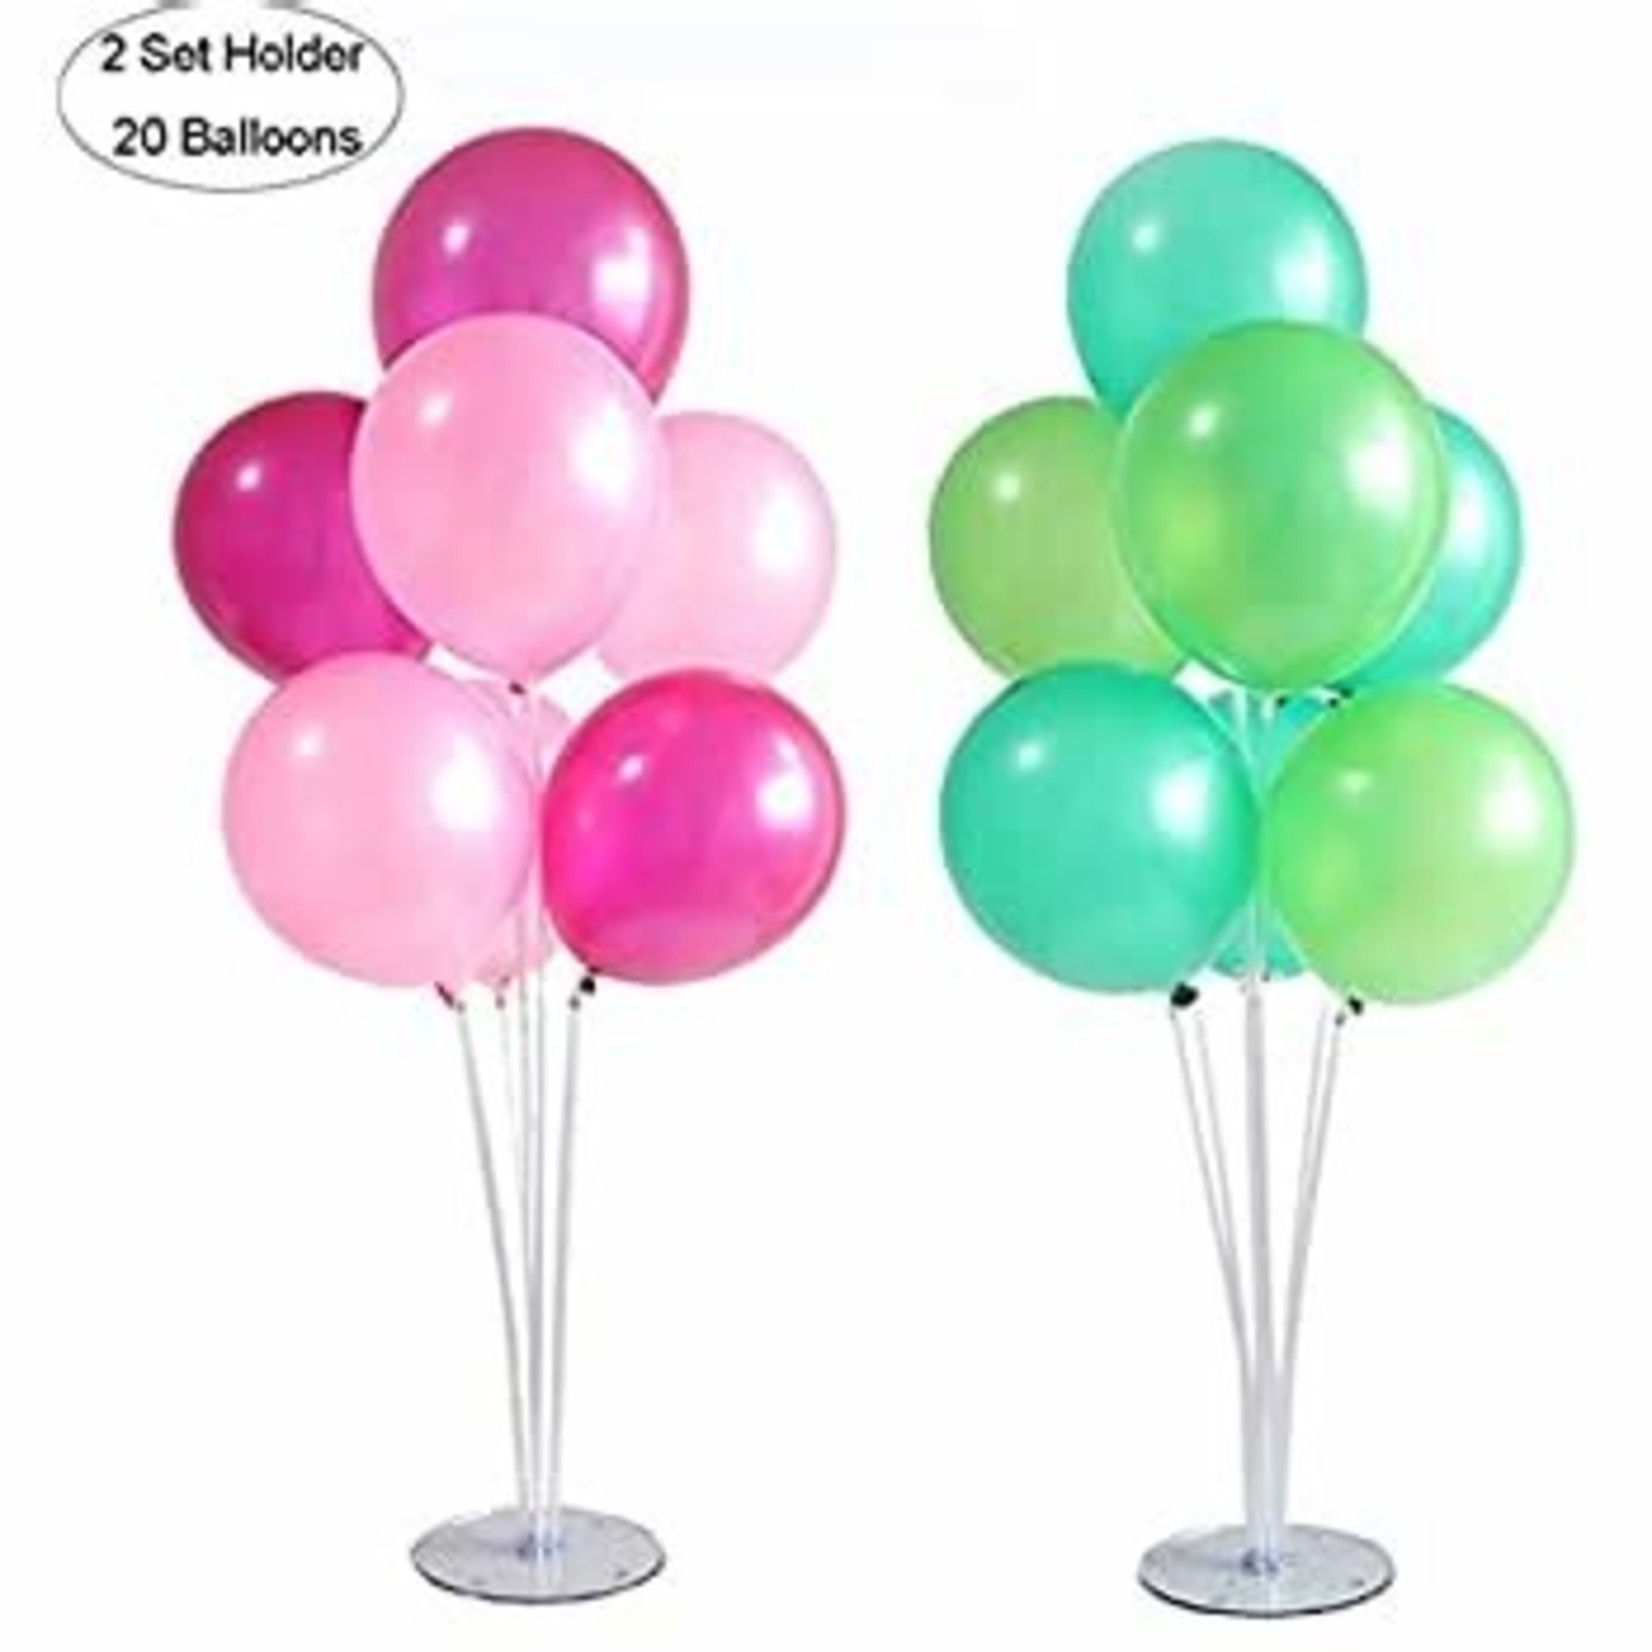 54" Balloon Cluster Stand